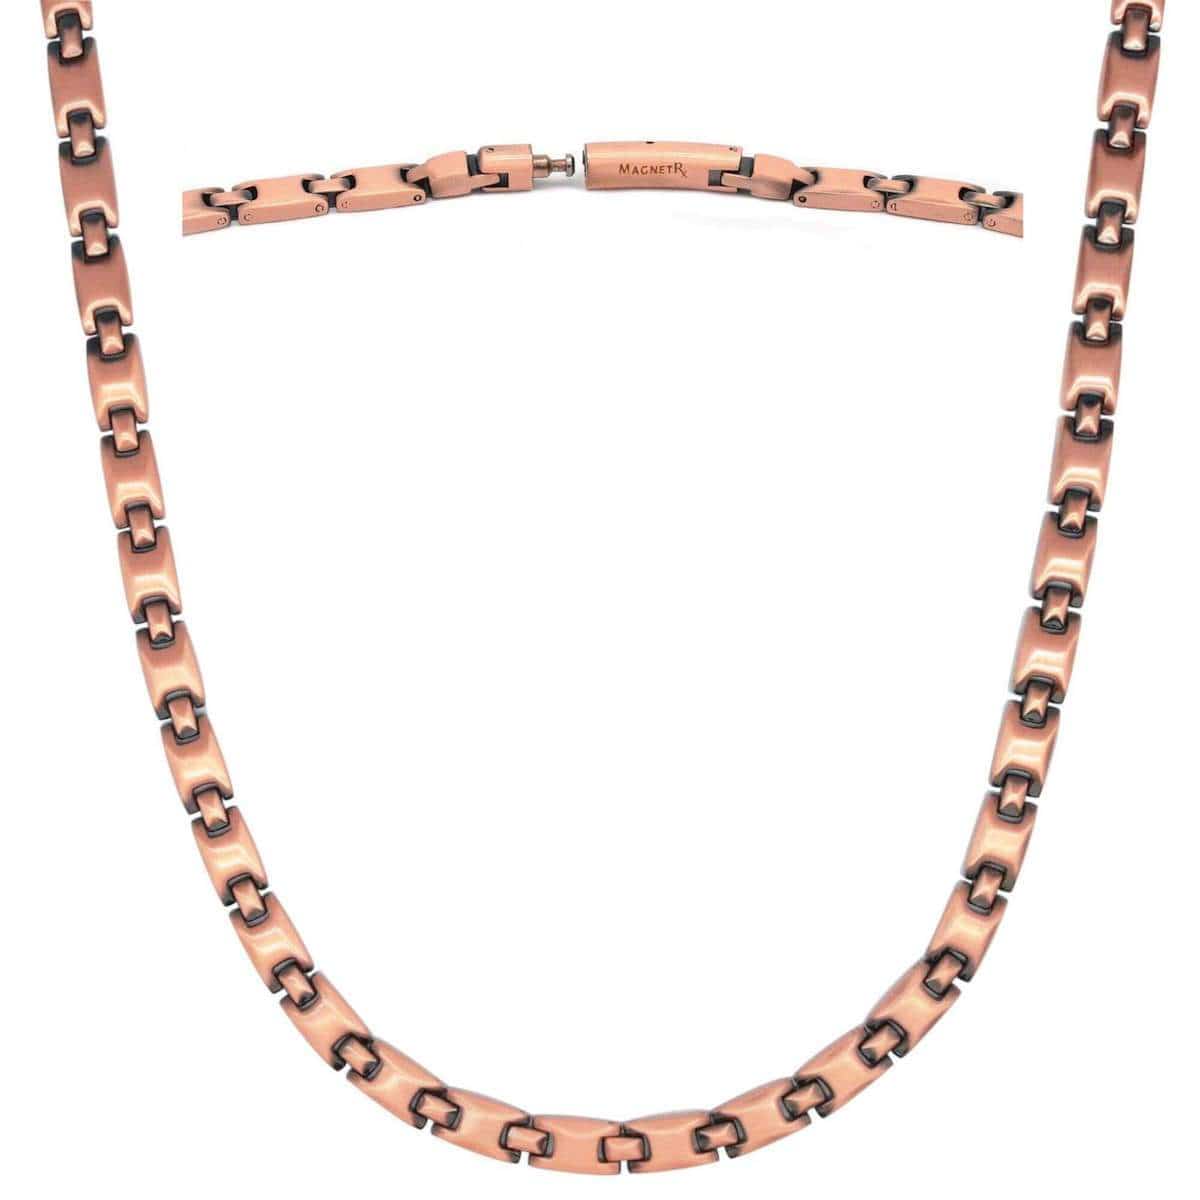 Copper Magnetic Therapy Necklace Lynx Chain